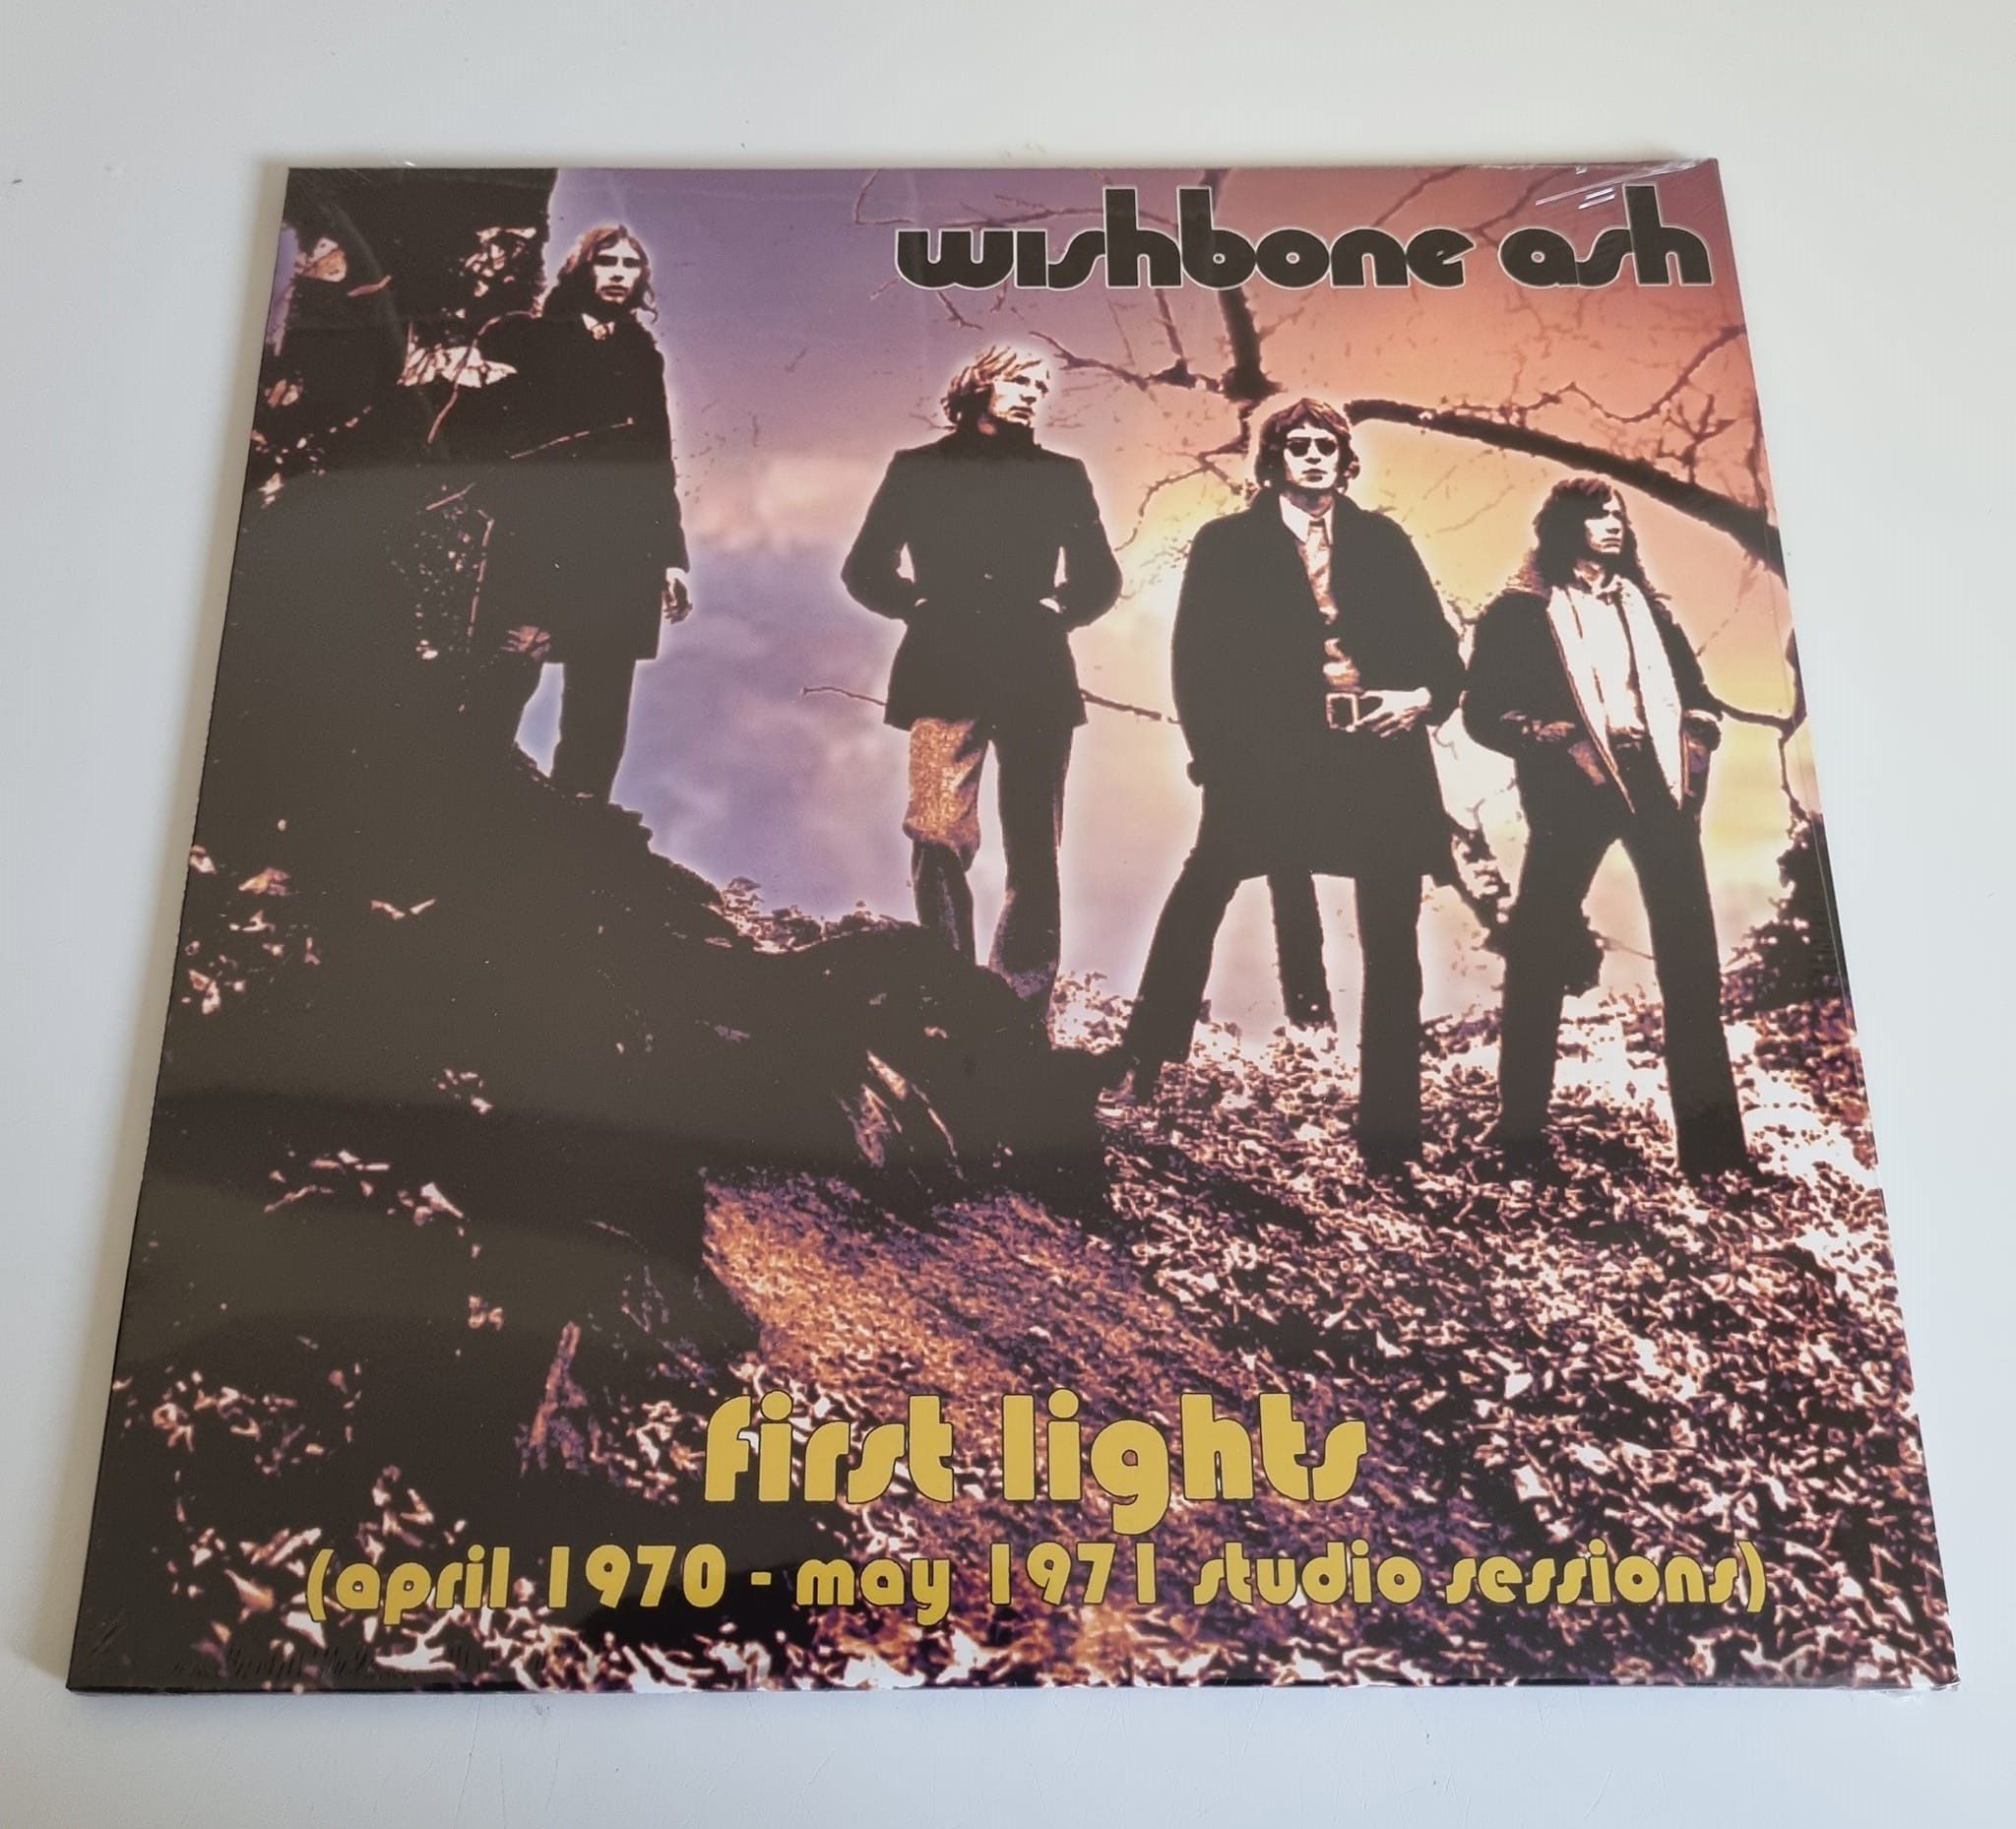 Buy this rare Wishbone Ash record by clicking here